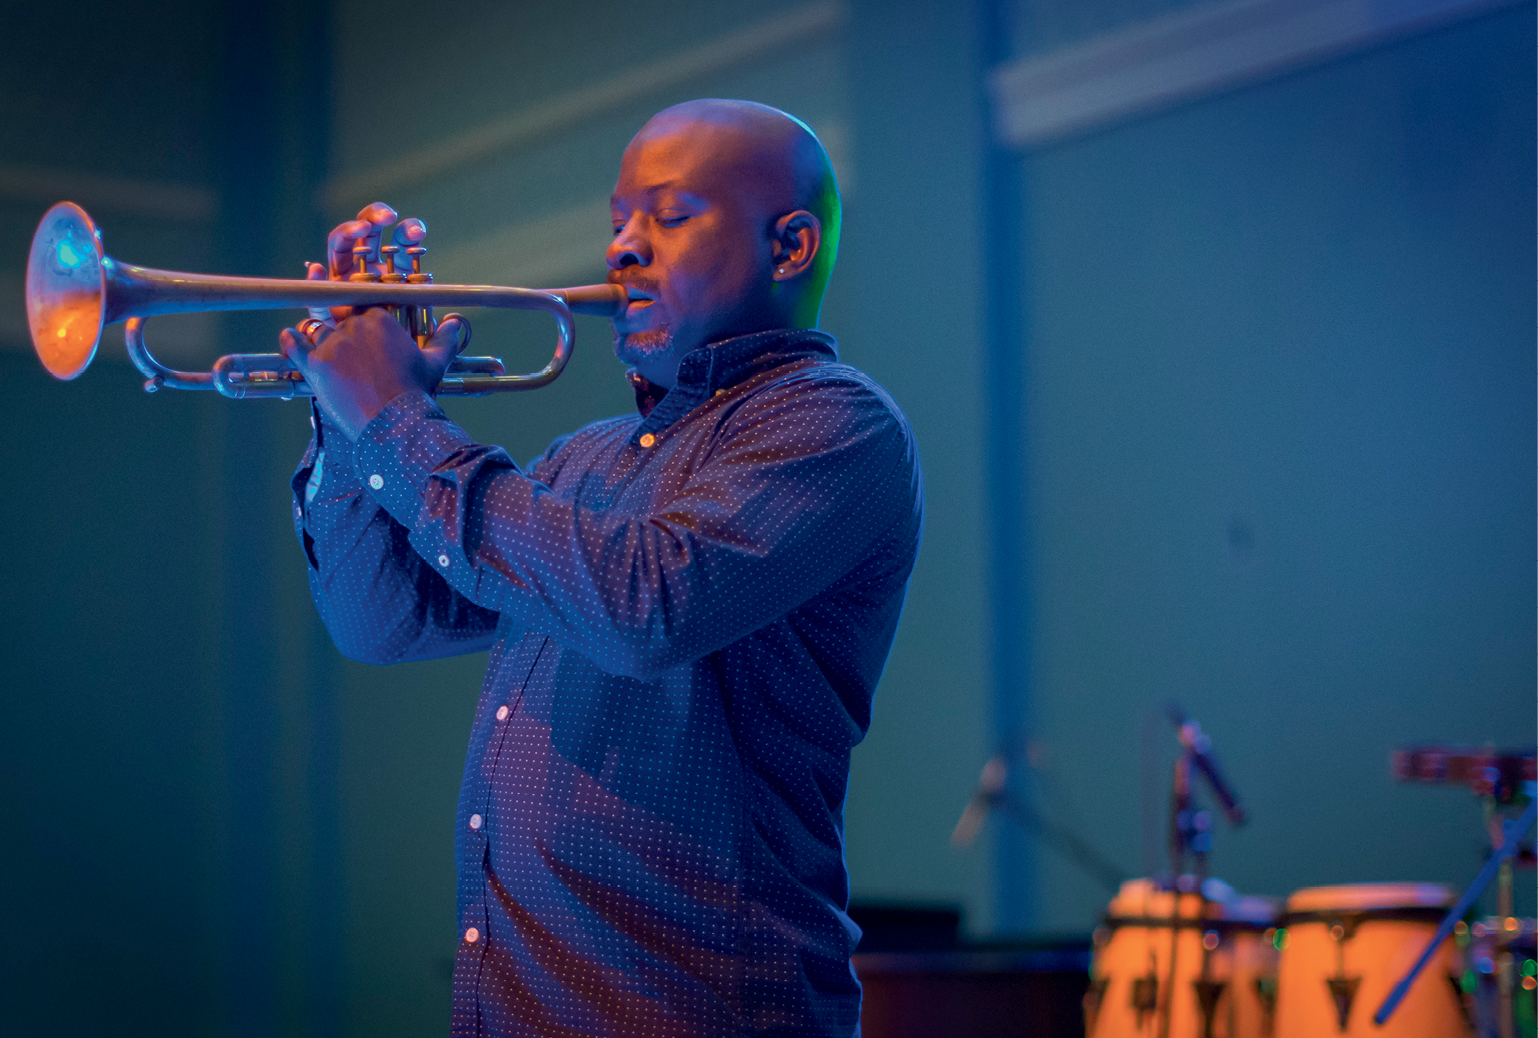 The lineup of very Charleston entertainment included jazz trumpeter Charlton Singleton, as well as singer Calvin Taylor, one of the original Drifters. Photo by Jonathan Balliet